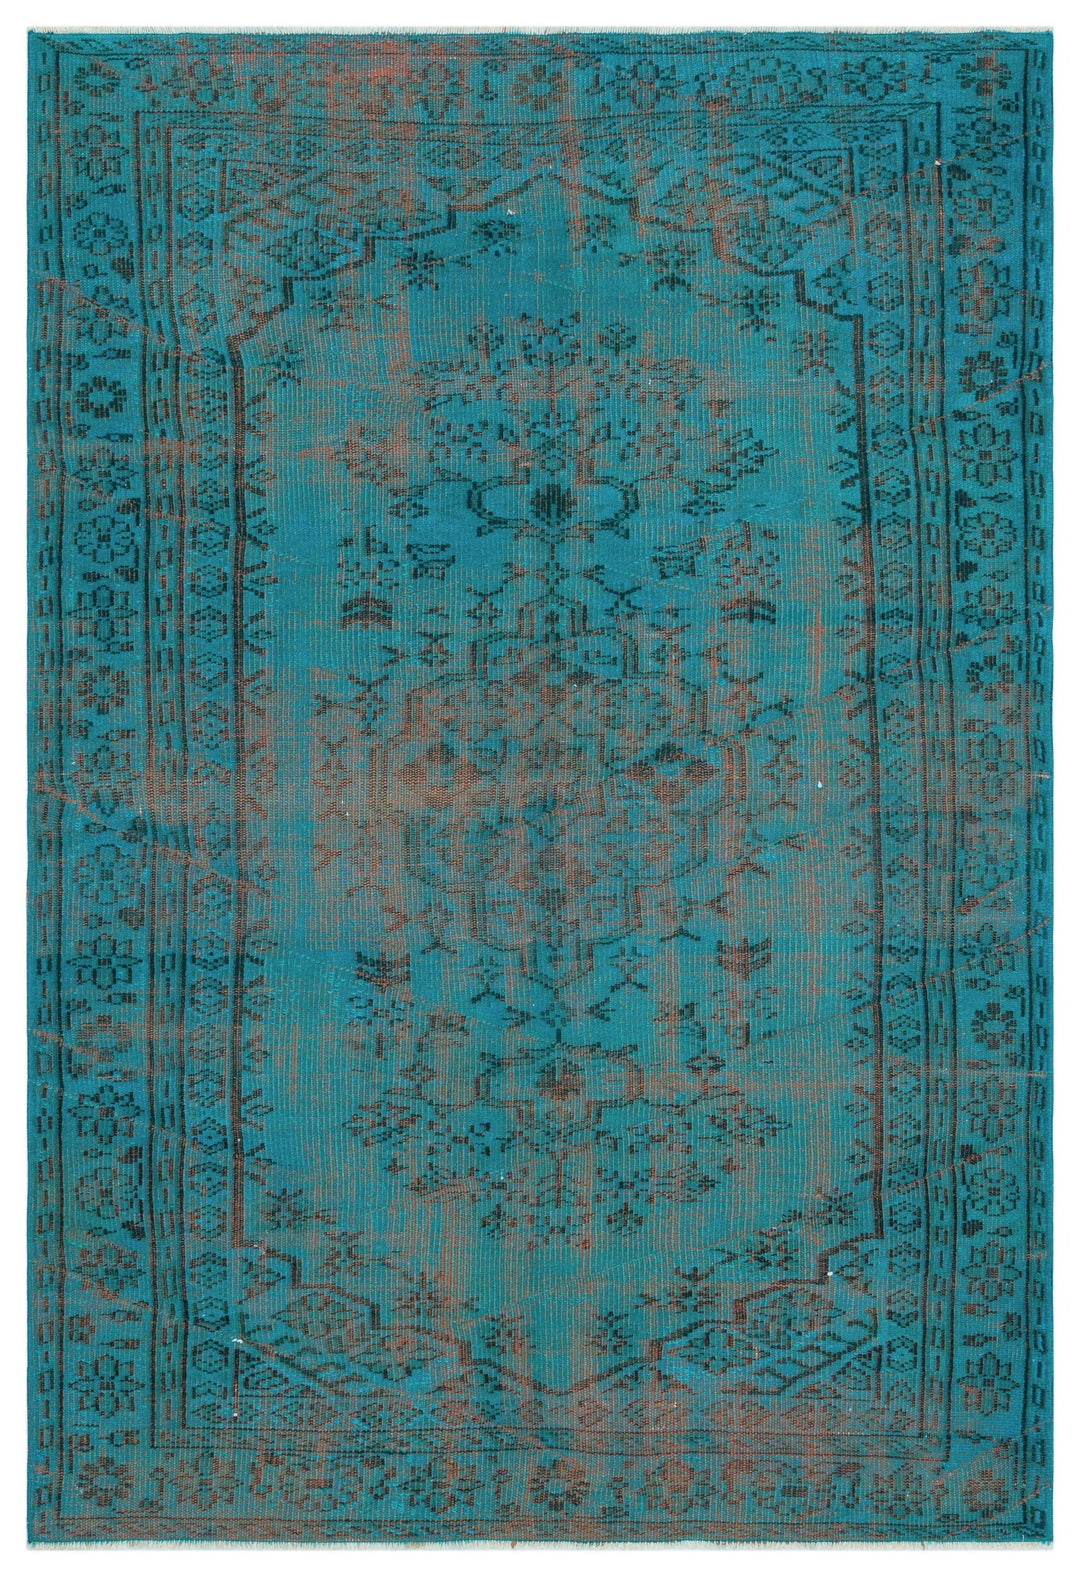 Athens Turquoise Tumbled Wool Hand Woven Carpet 152 x 228